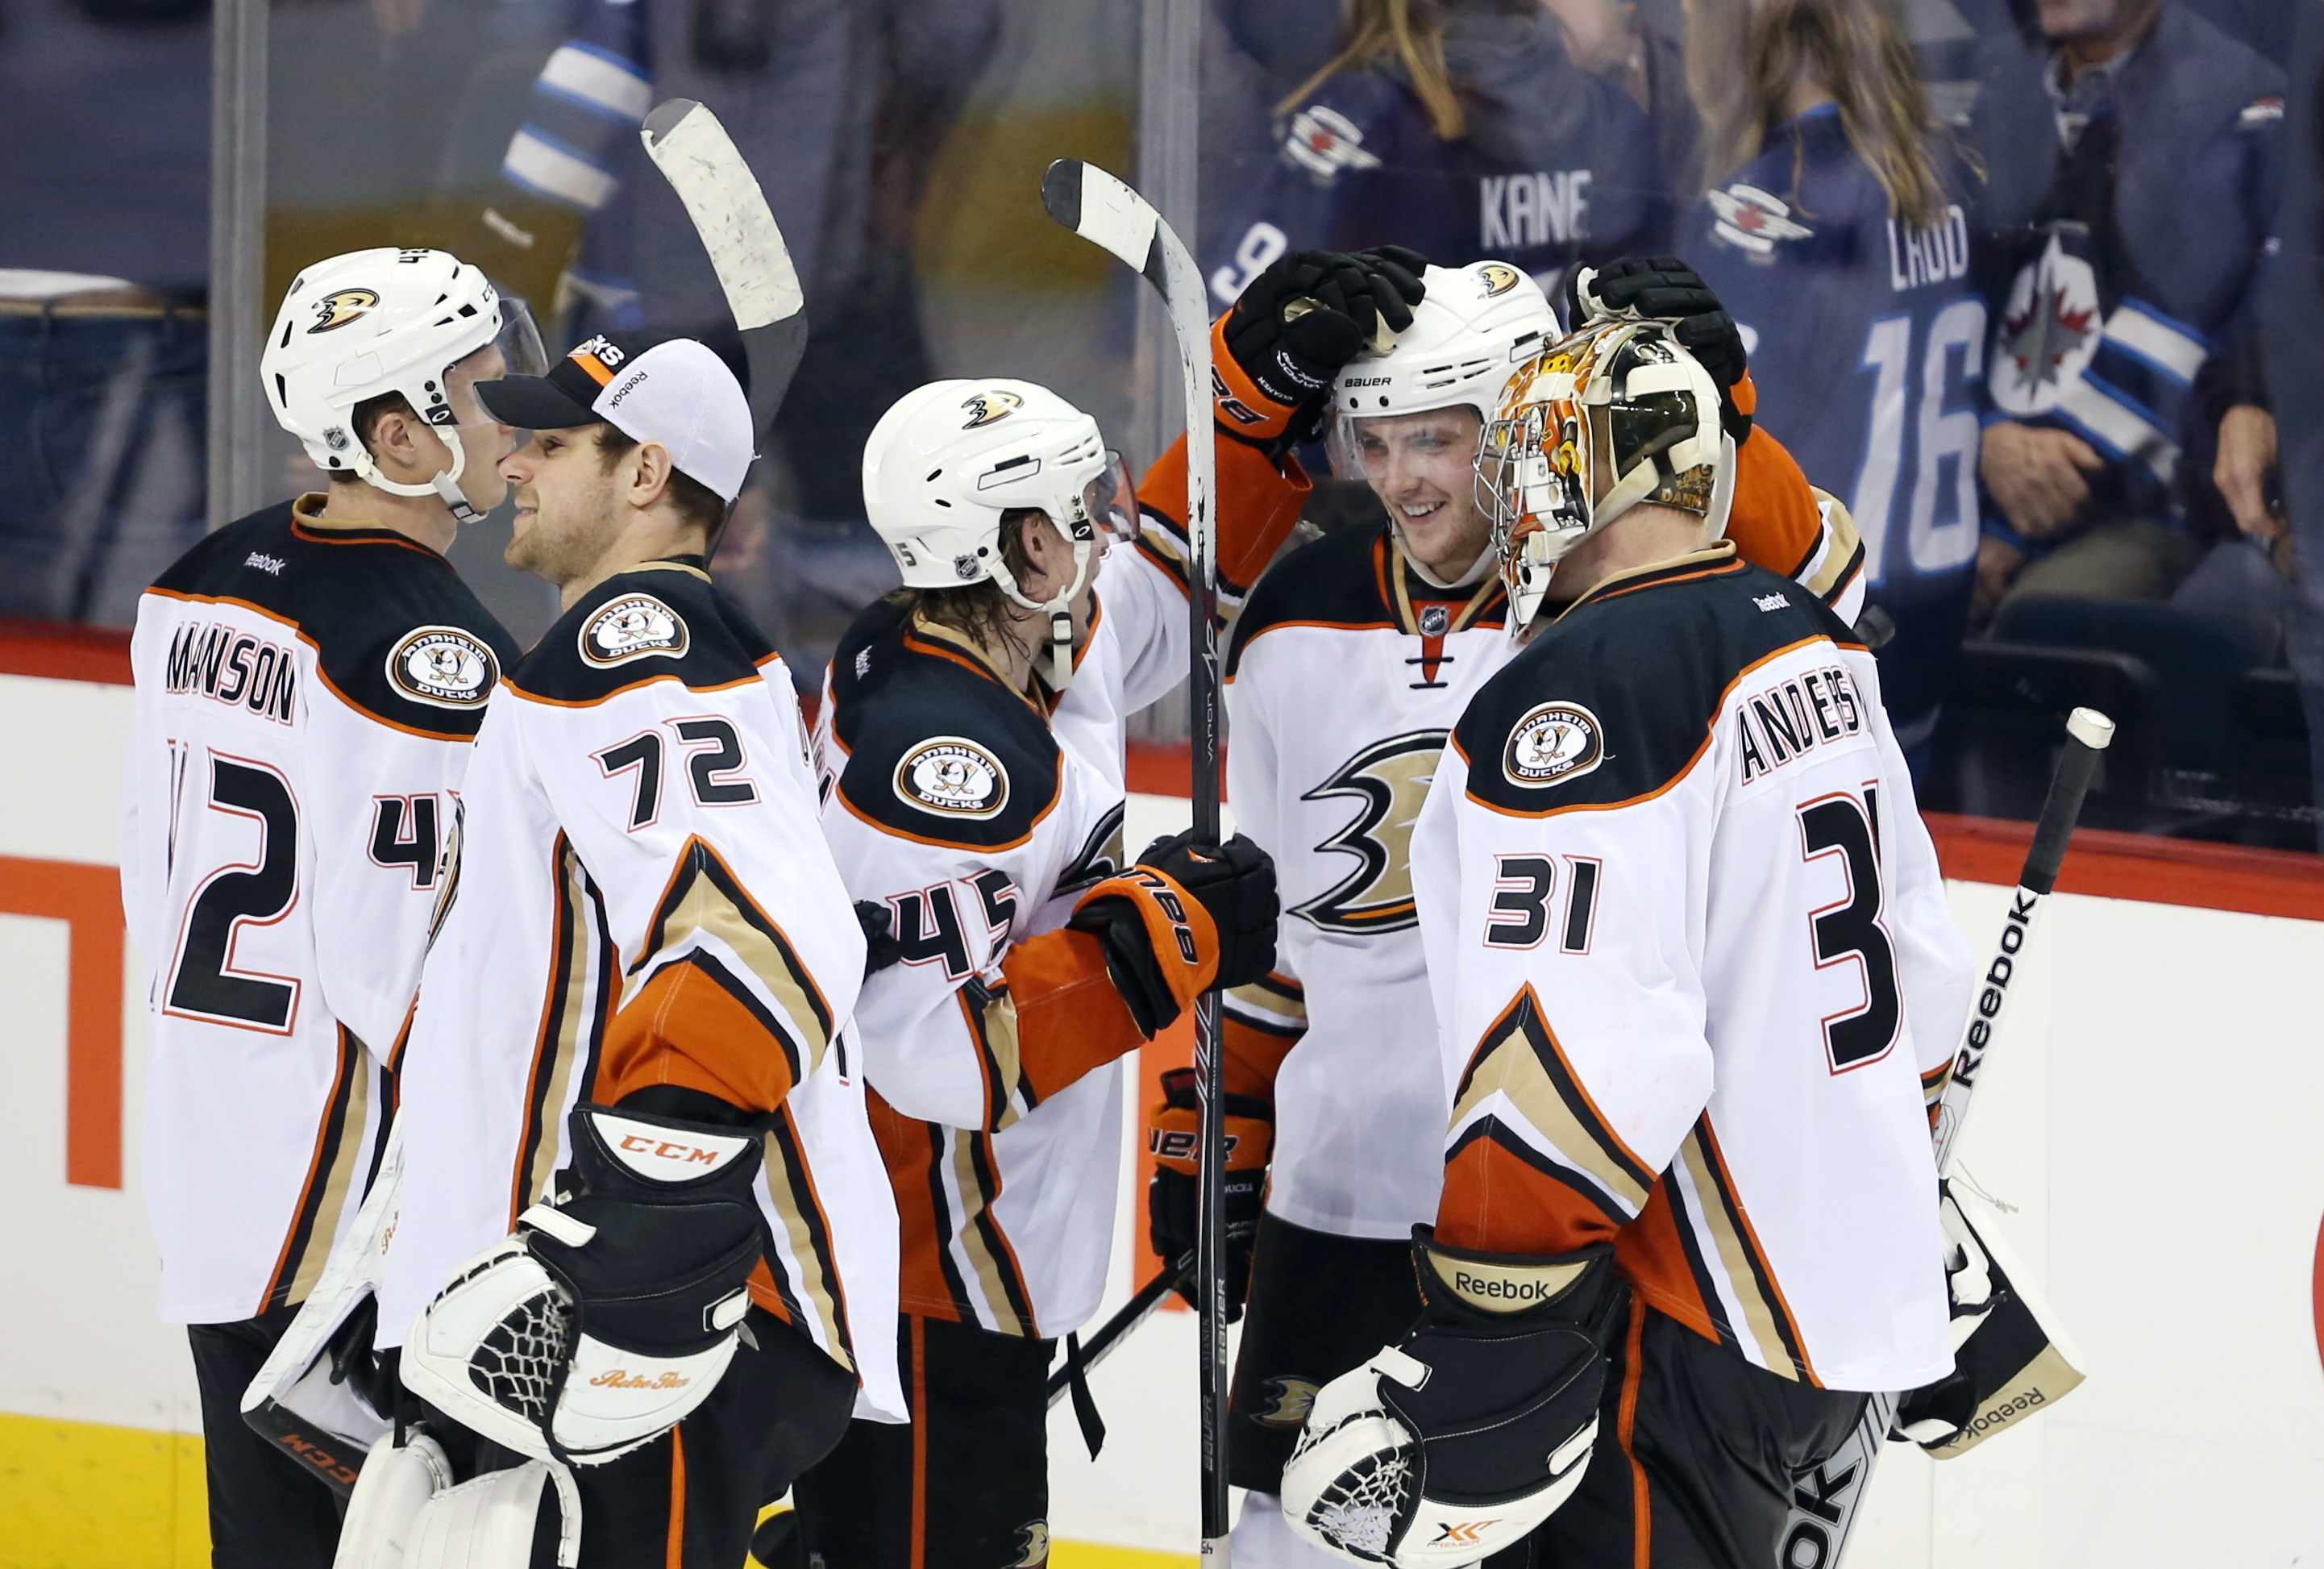 Watch: Ducks win on Kyle Palmieri’s perfect shot | For The Win